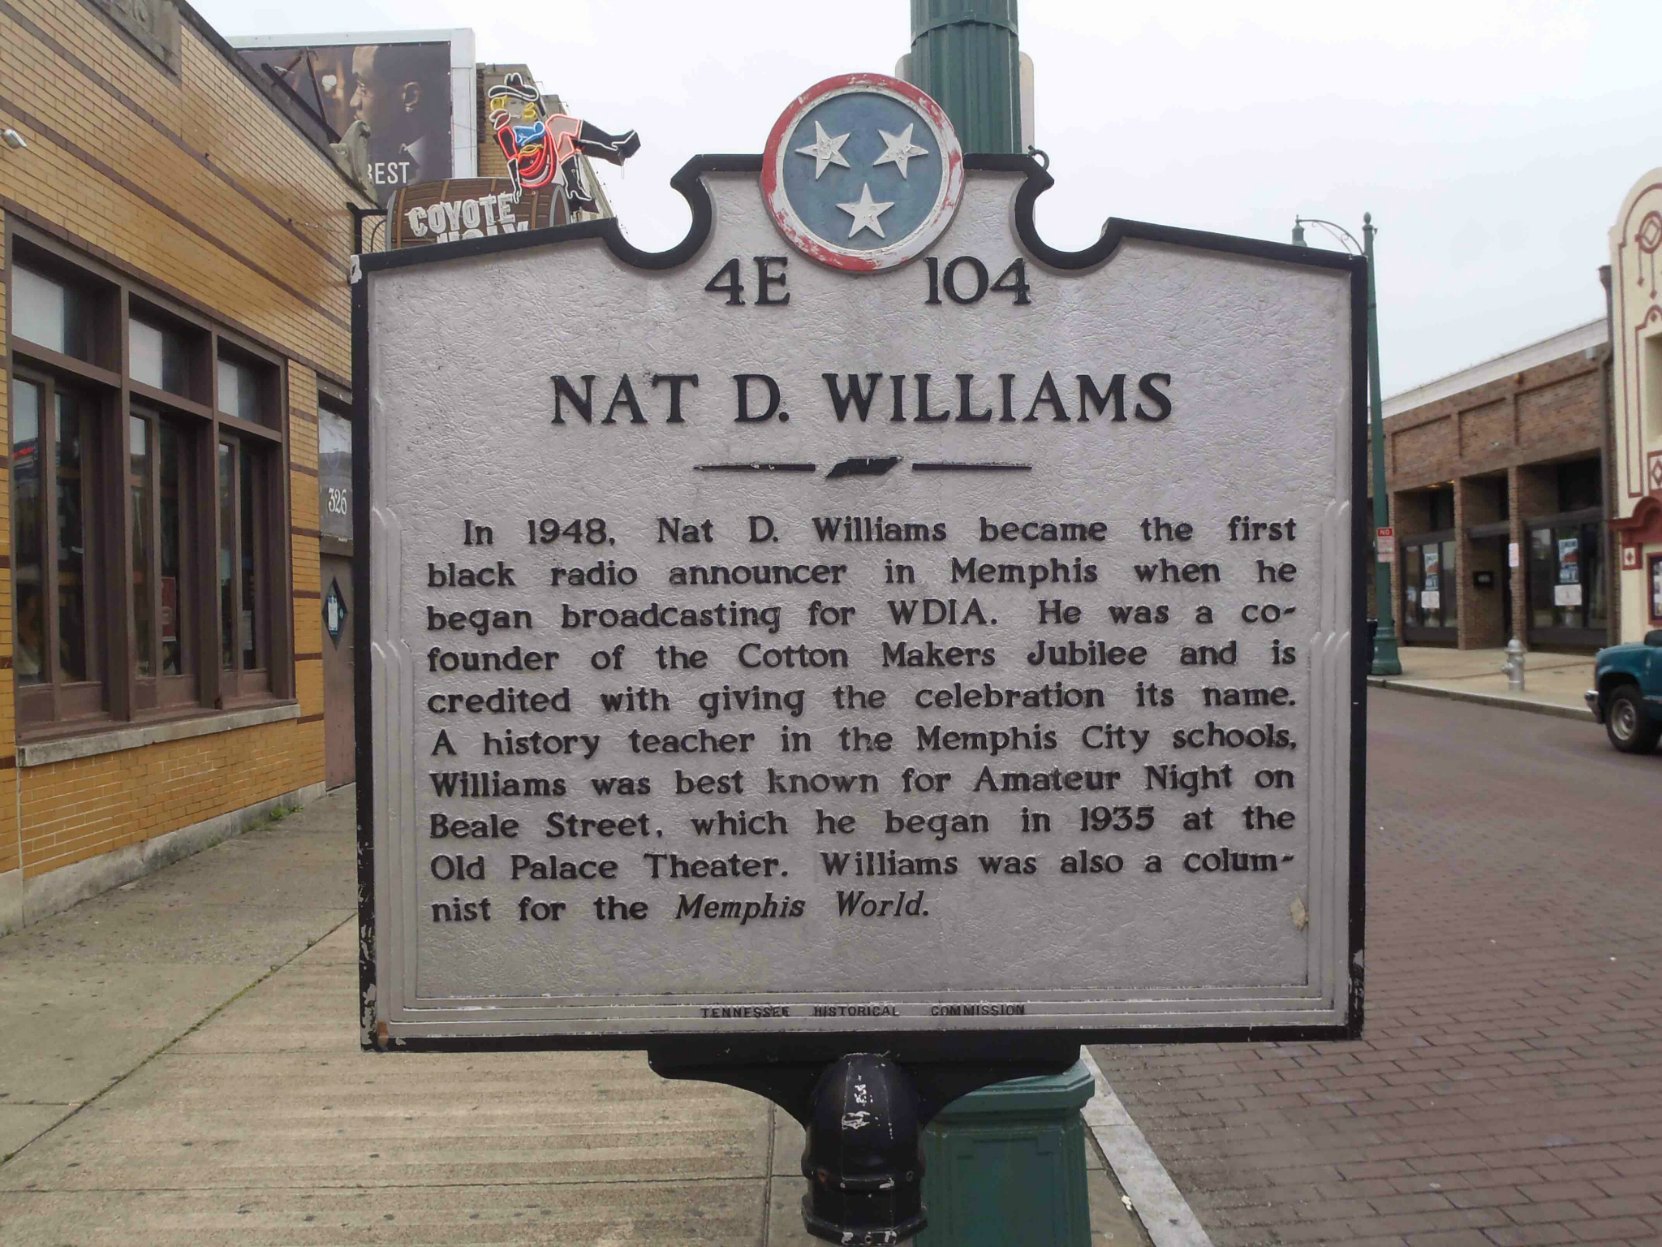 Tennessee Historical Commission marker for Nat D. Williams, Beale Street, Memphis, Tennessee